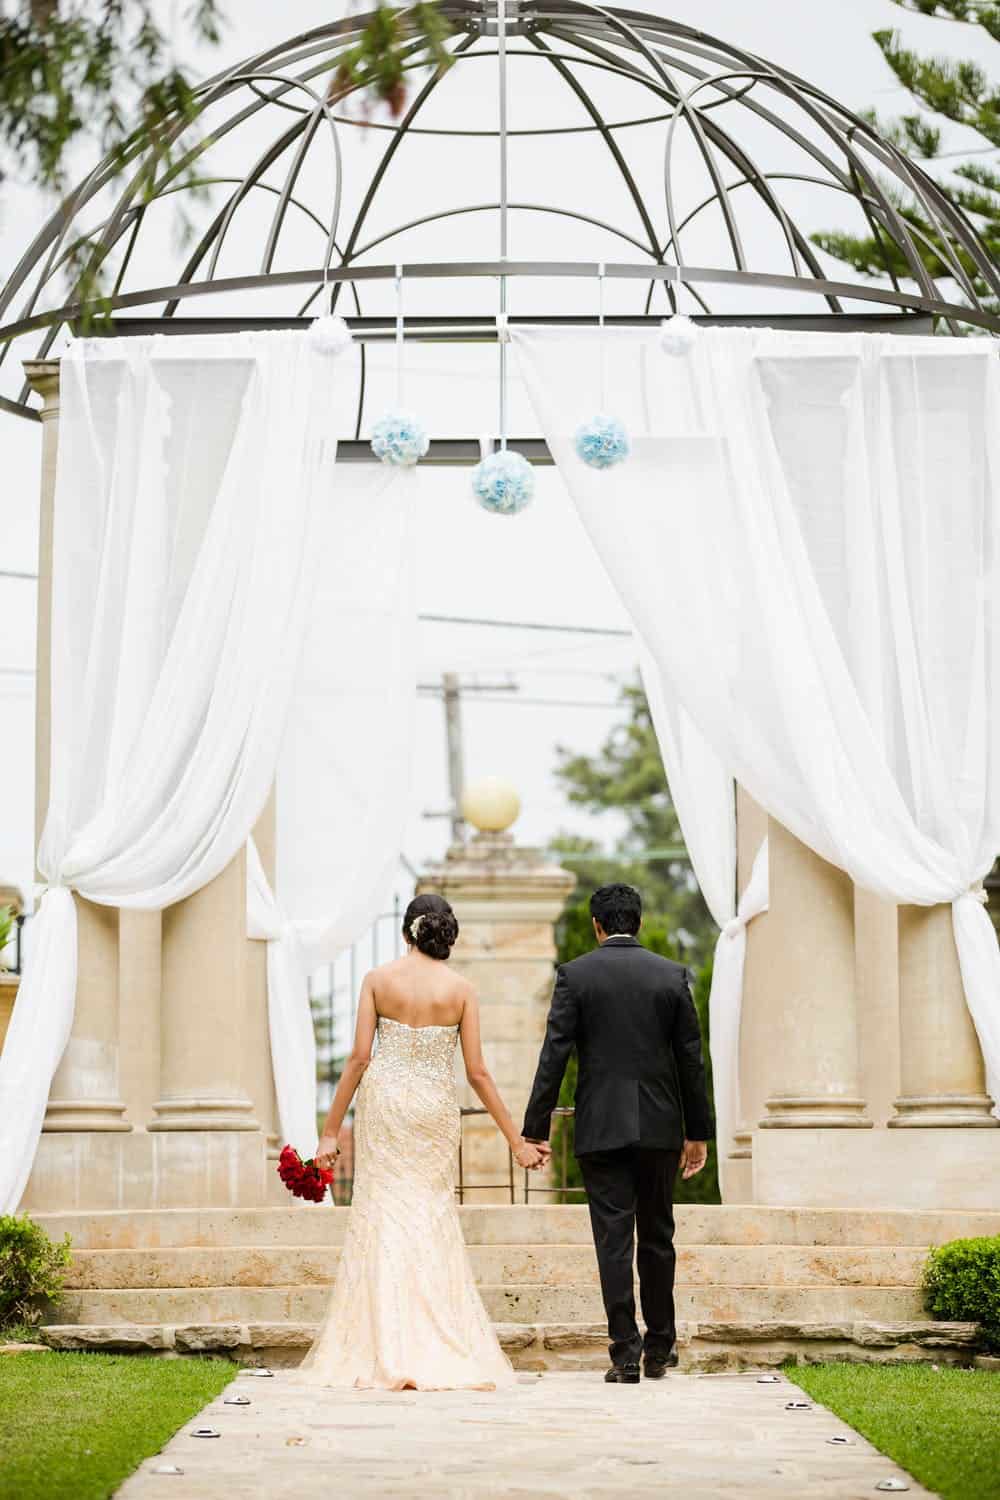 Add some jazz to your wedding ceremony and reception￼ | Things That Make People Go Aww